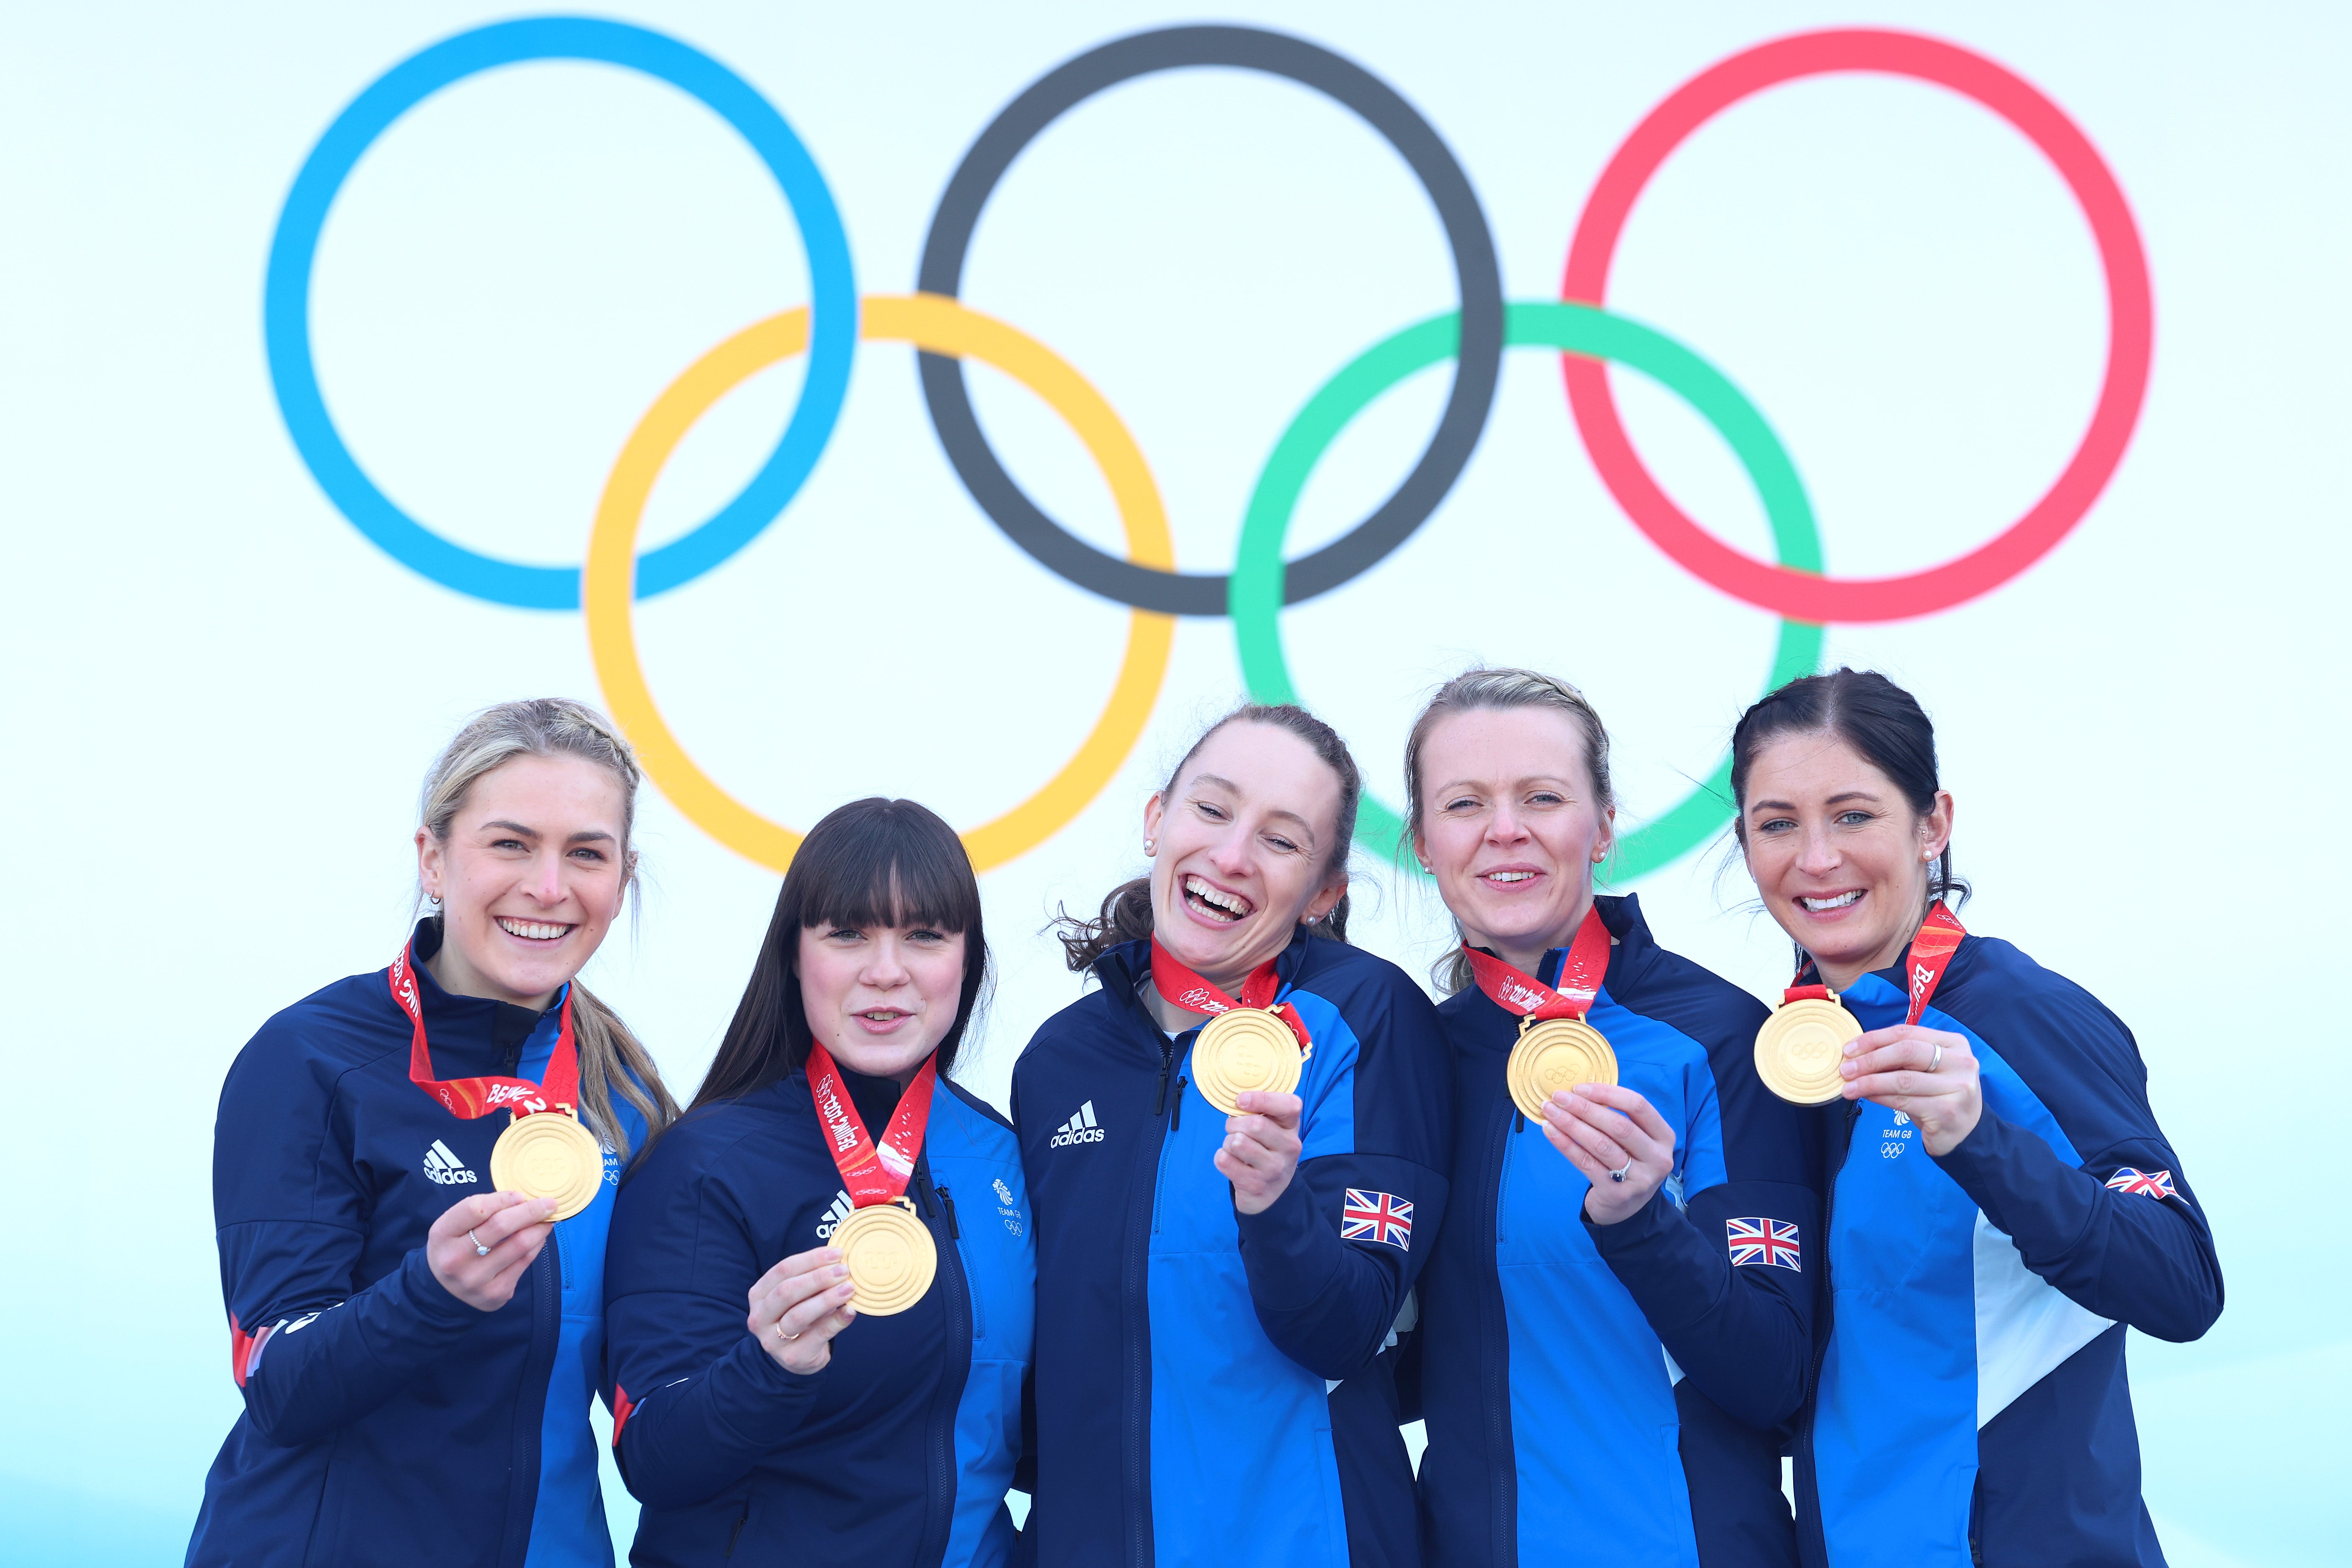 Eve Muirhead’s side won gold on the final day but Team GB fell below their medal target